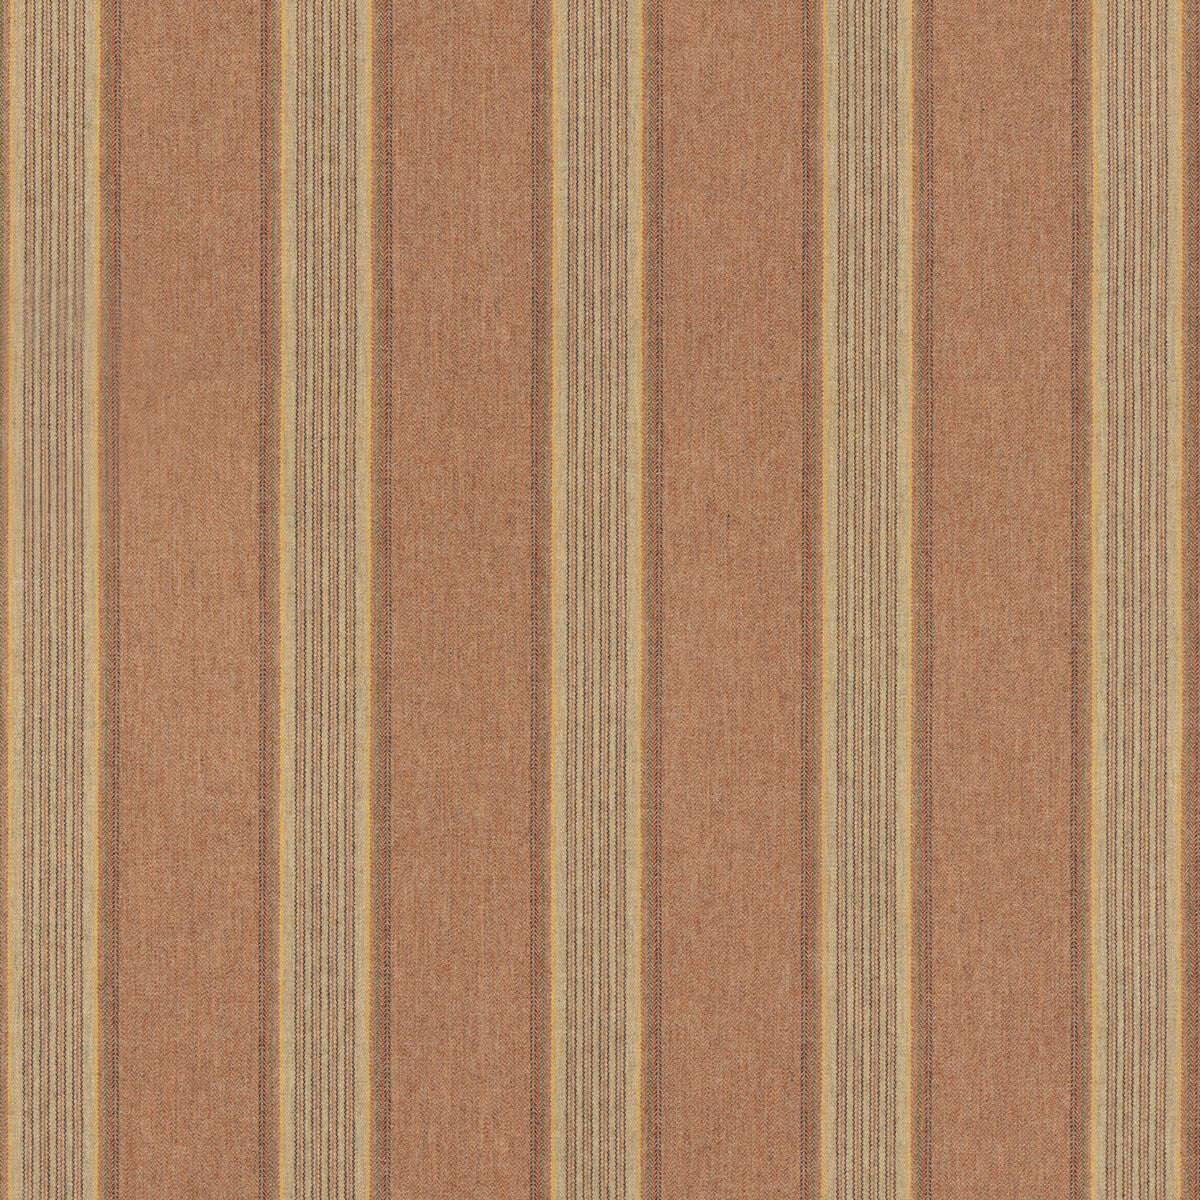 Moray Stripe fabric in rose/sand color - pattern FD808.V59.0 - by Mulberry in the Mulberry Wools IV collection